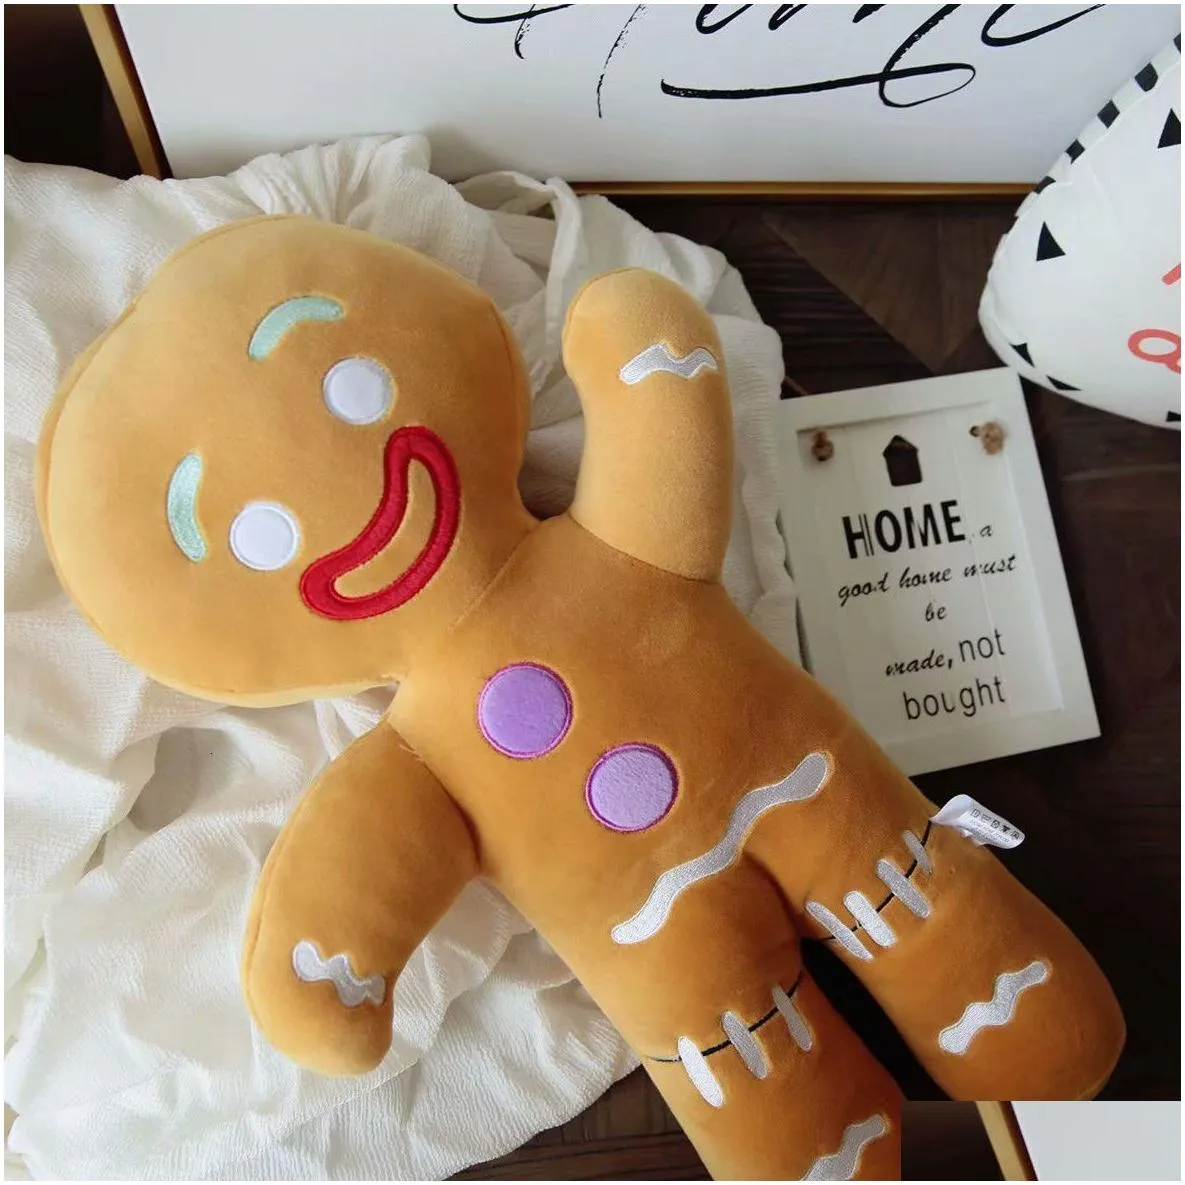 dolls 3060cm cartoon cute gingerbread plush toys pendant stuffed baby appease doll biscuits man pillow reindeer for kids gift 221206